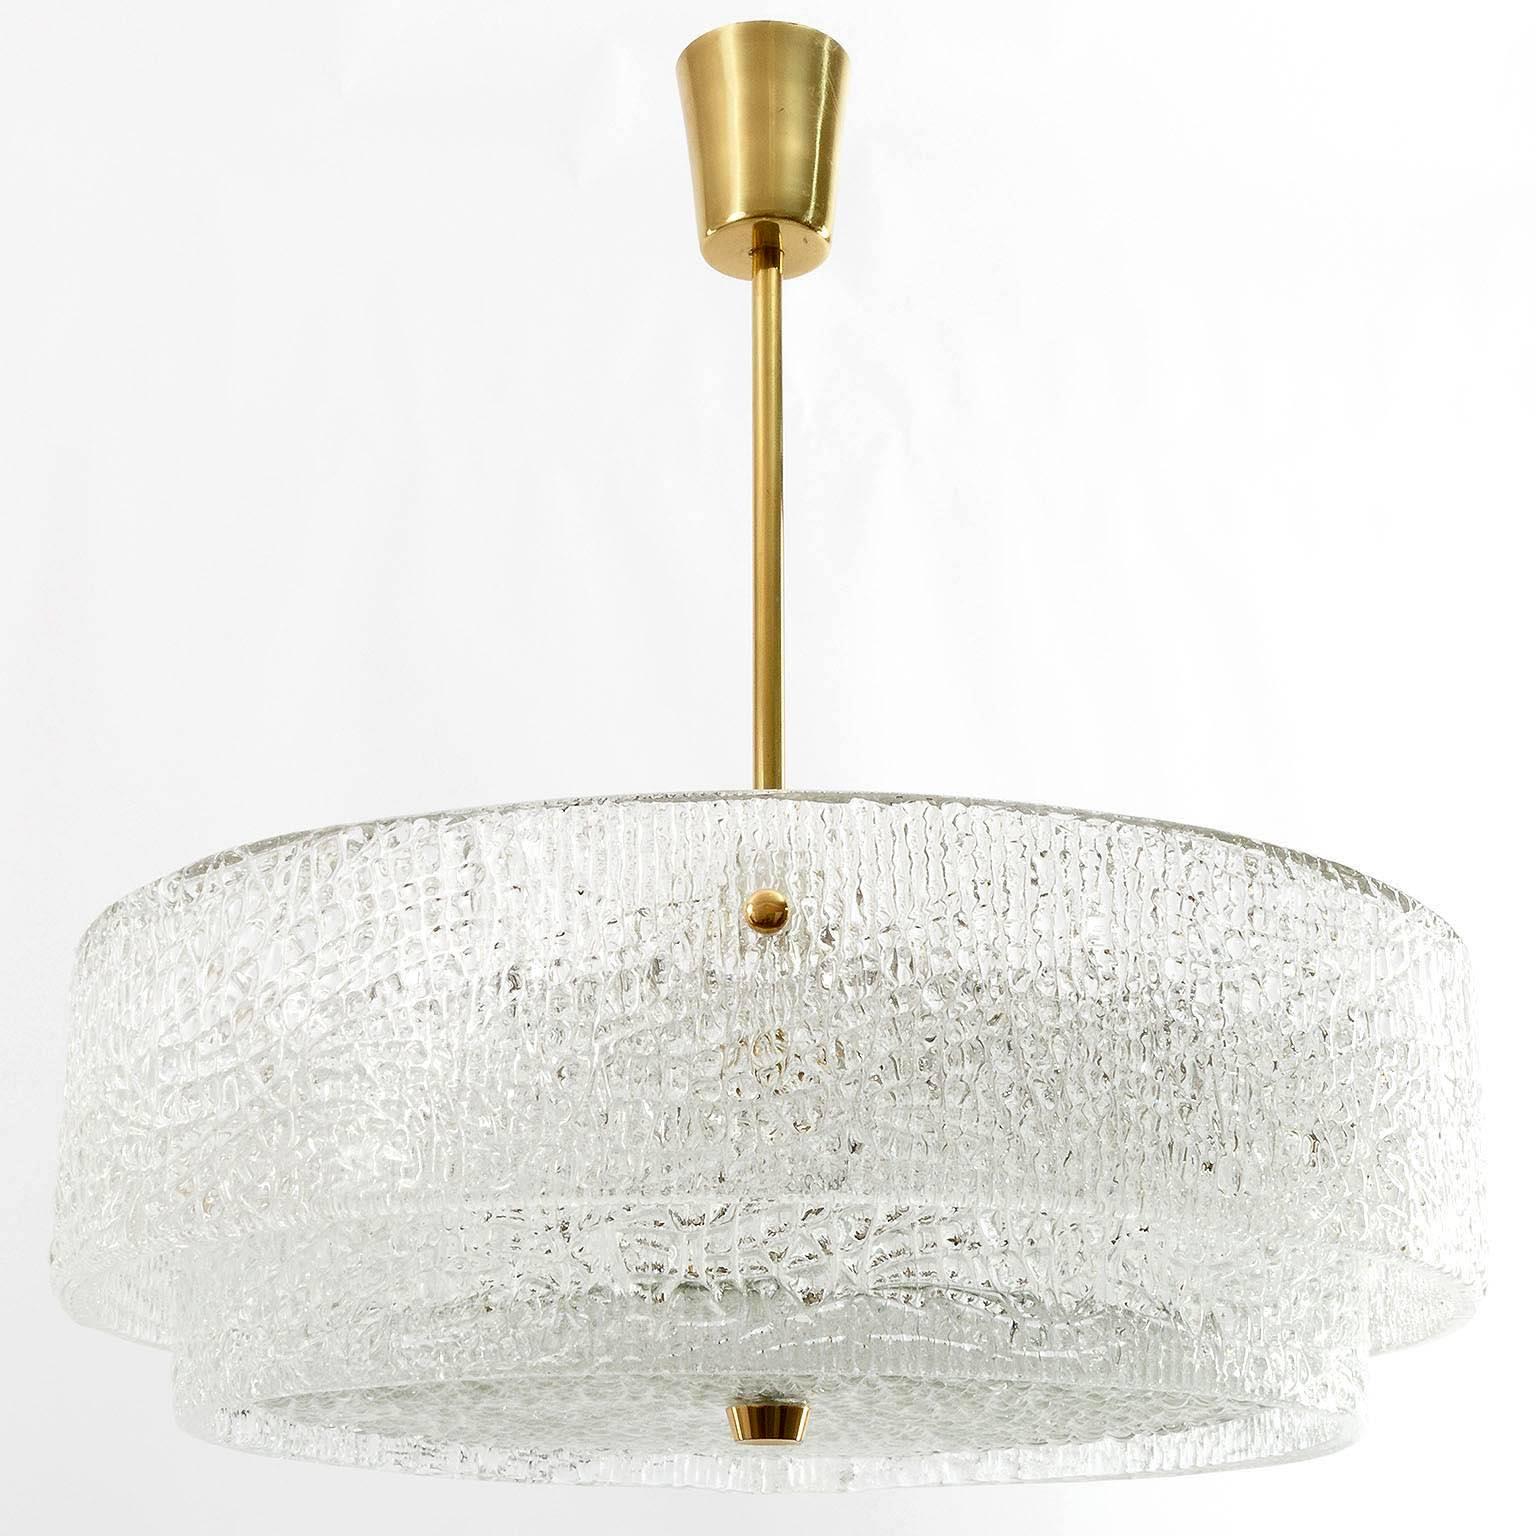 A beautiful textured glass and brass light fixture by J.T. Kalmar, Vienna Austria, manufactured in midcentury, circa 1960 (late 1950s or early 1960s).
Two round glass belts are mounted on a white enameled metal frame. A round glass disk is held by